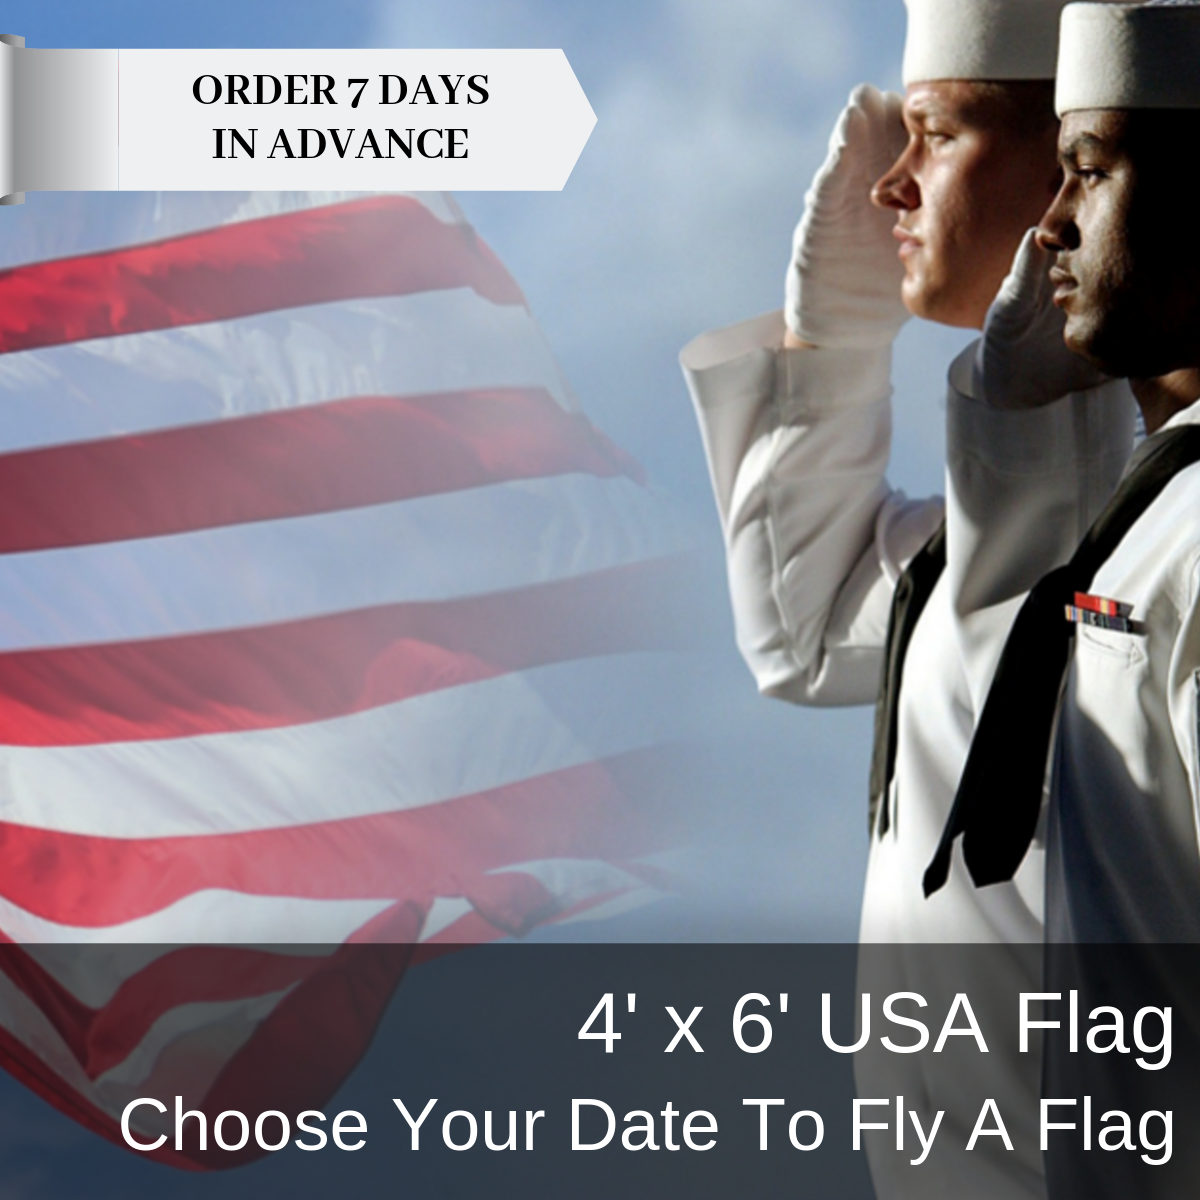 4x6 Choose Your Date USA Flag Flown On USS Arizona Memorial At Pearl Harbor